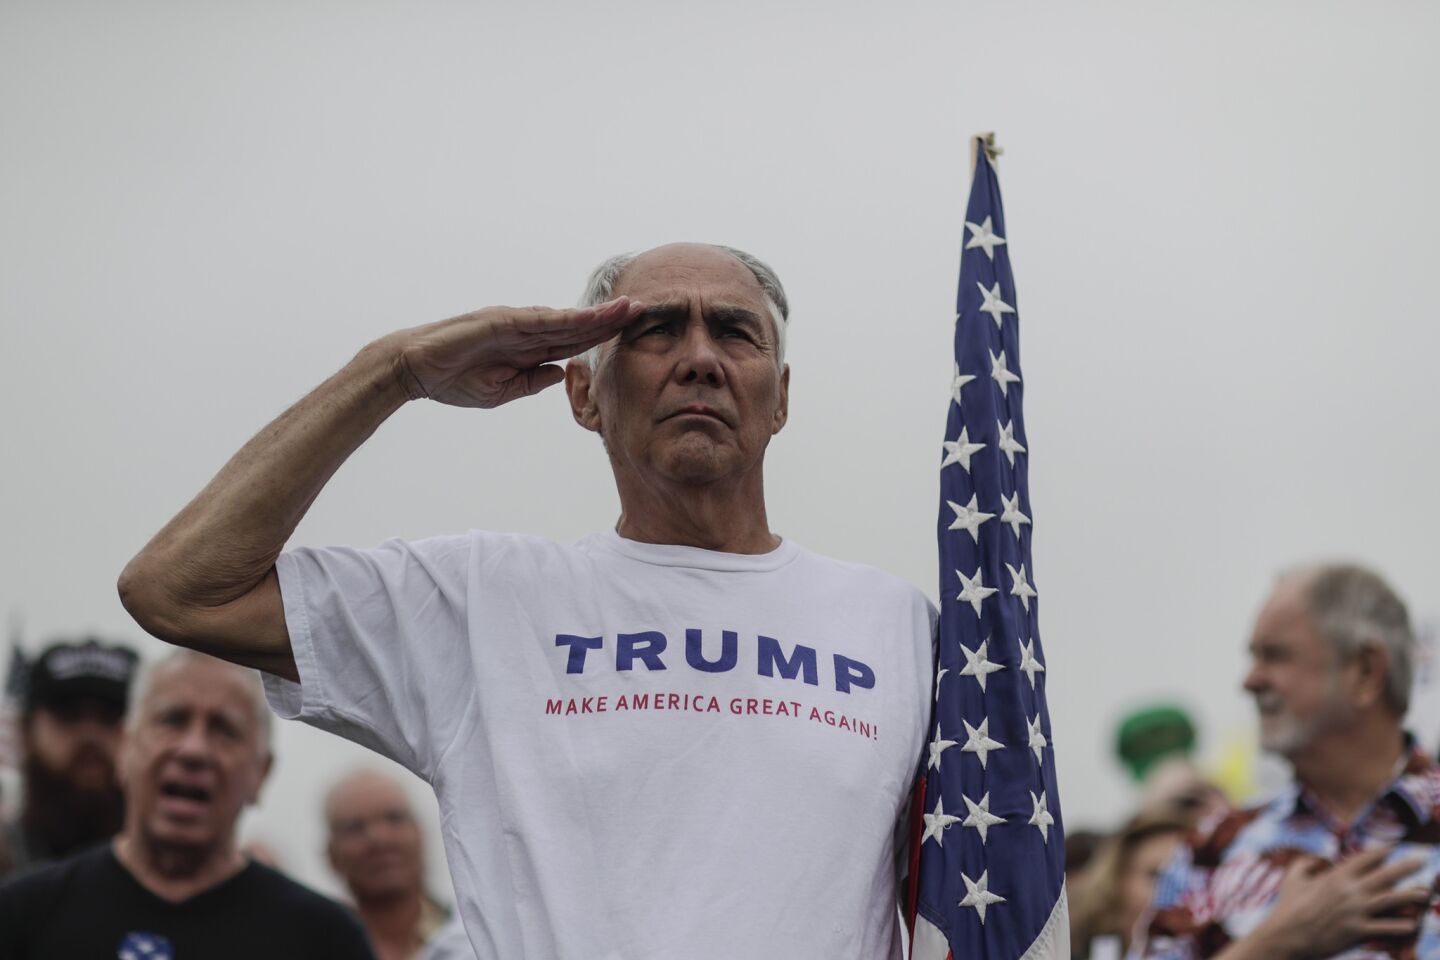 Adrian Asencio, 73, from Redlands, salutes as the National Anthem is played for a rally supporting President Trump a few miles away from the border wall prototypes near San Diego.